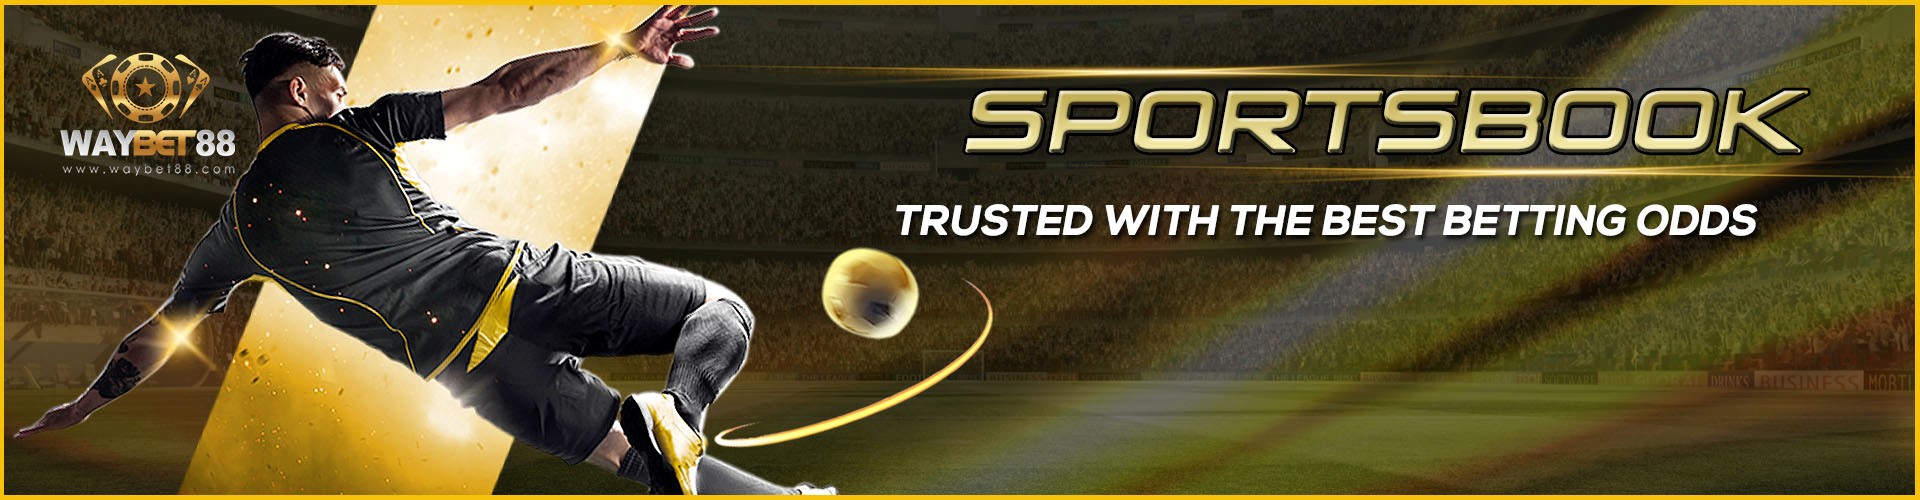 Online Betting Sites: Make Money Betting On Professional Sports